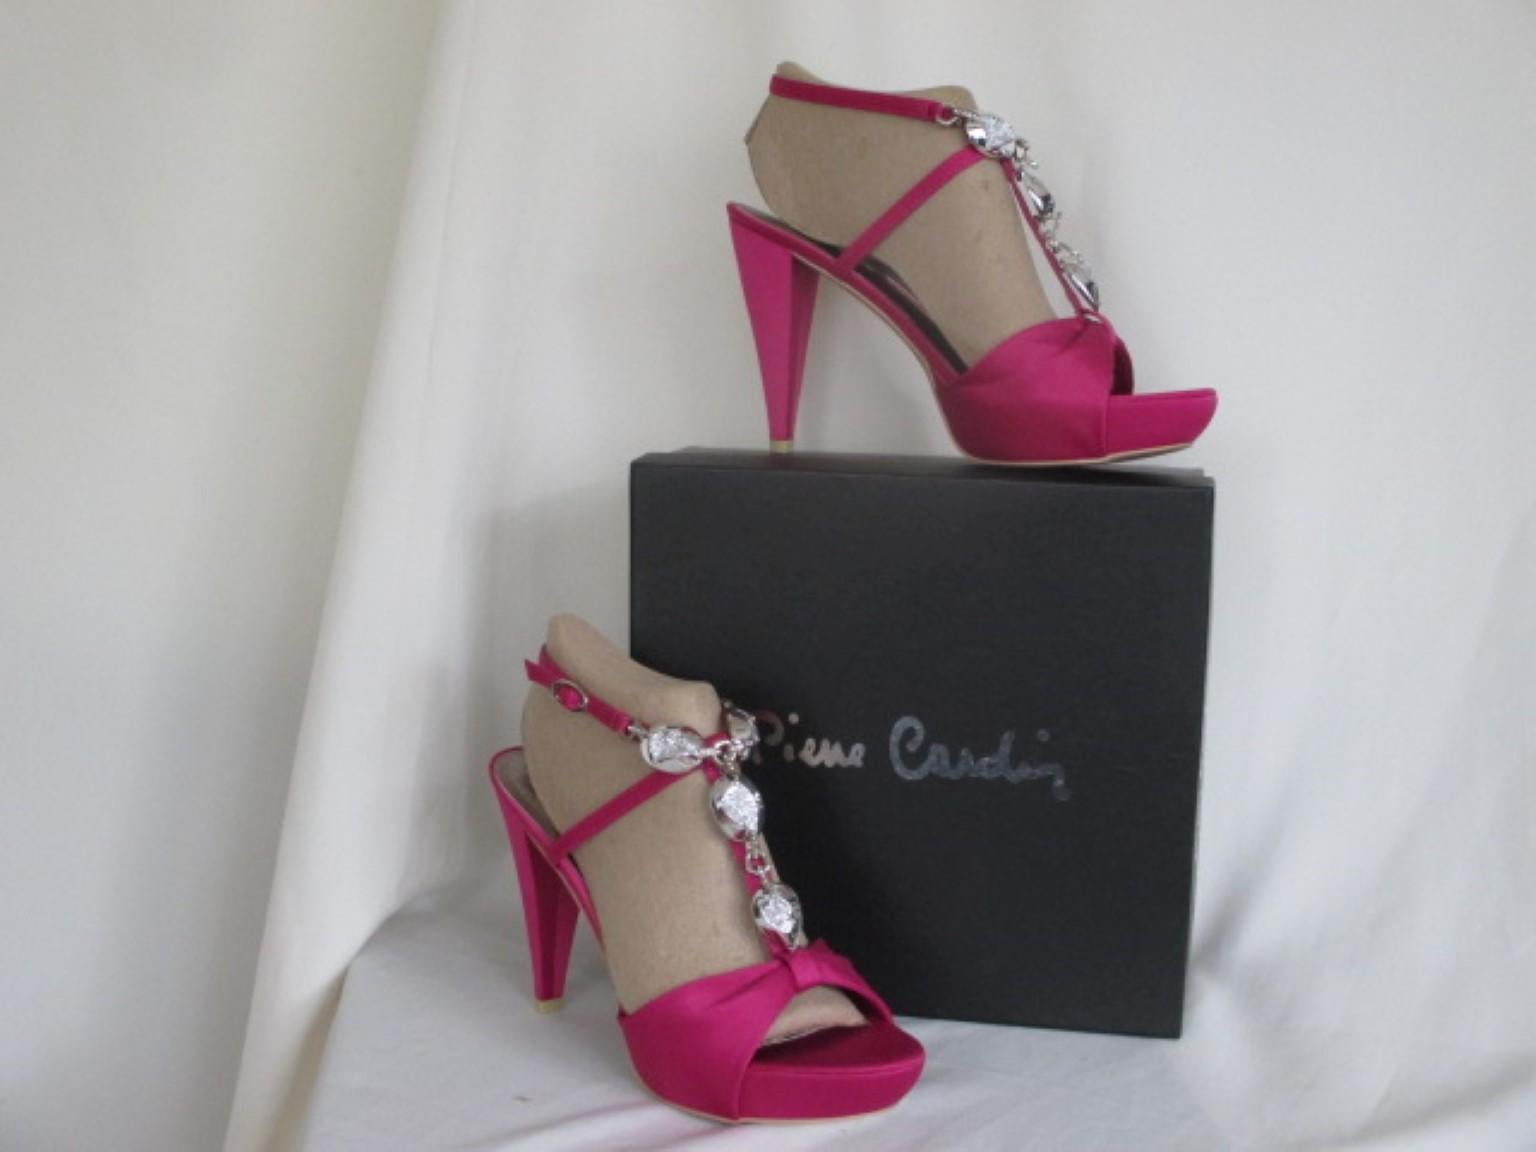 New in box, old stock, rare Pierre Cardin platform heels
The material is satin with silver color decorative stones
Its in excellent condition
Comes with the original box
size is EU 41/  US 10.5 /  UK 8.5
We offer this item also in pink color in the